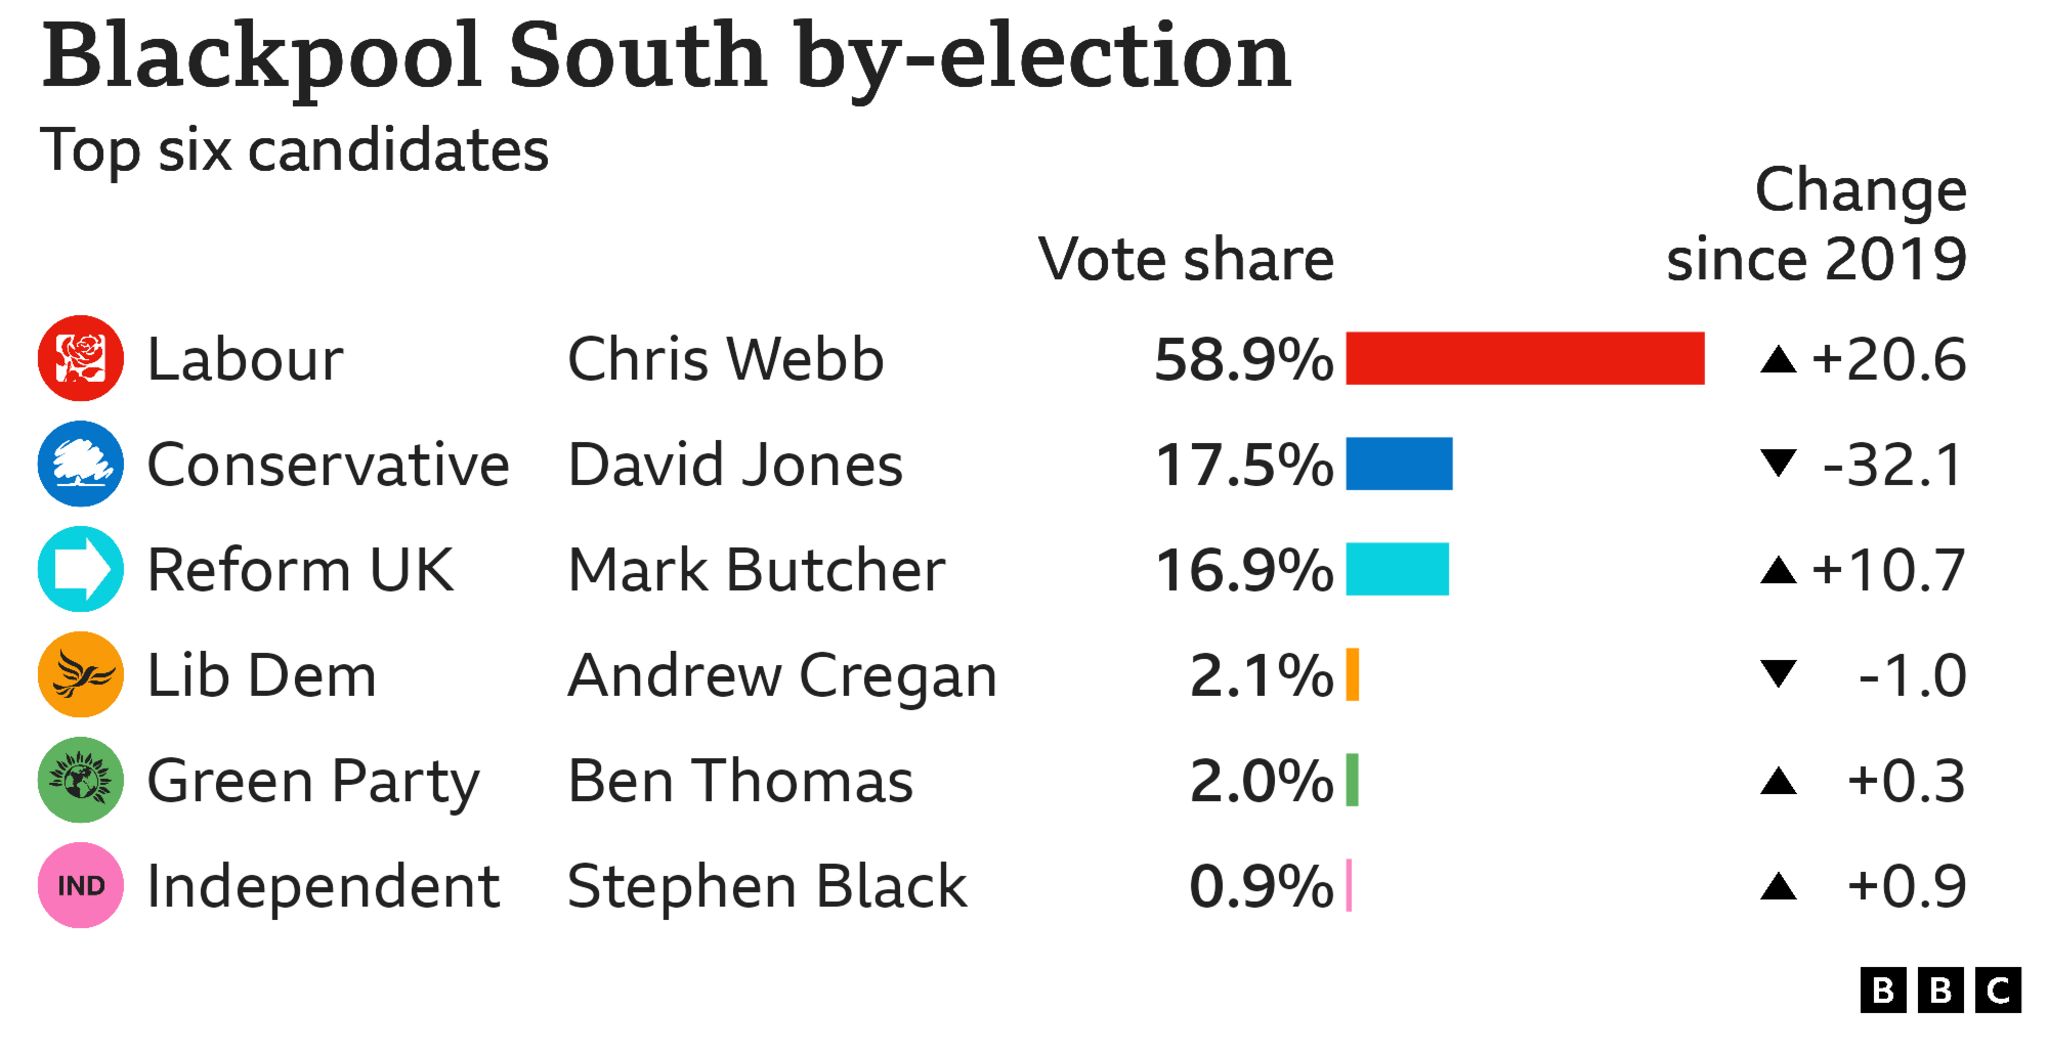 Blackpool South by-election result: Lab 58.9%, Con 17.5%, Ref 16.9%, Lib Dems 2.1%, Green 2%, Independent 0.9%